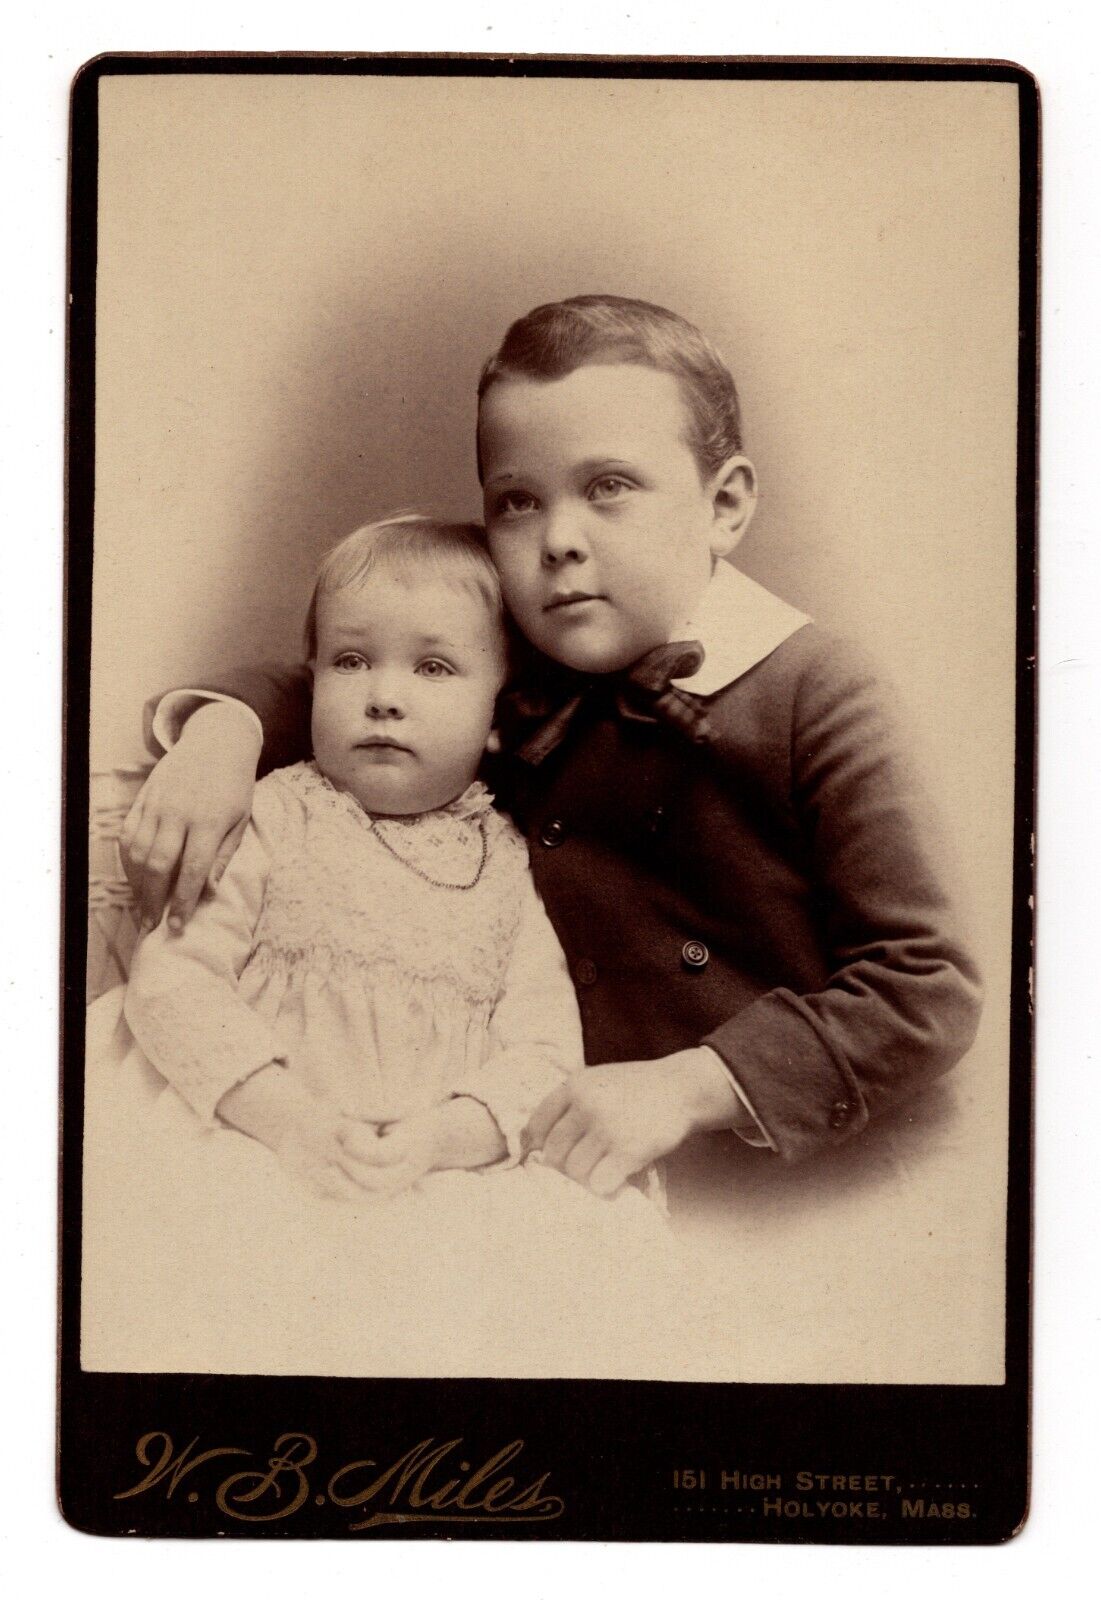 C. 1880s CABINET CARD W.B. MILES CUTE LITTE KIDS BROTHER & SISTER HOLYOKE MASS.